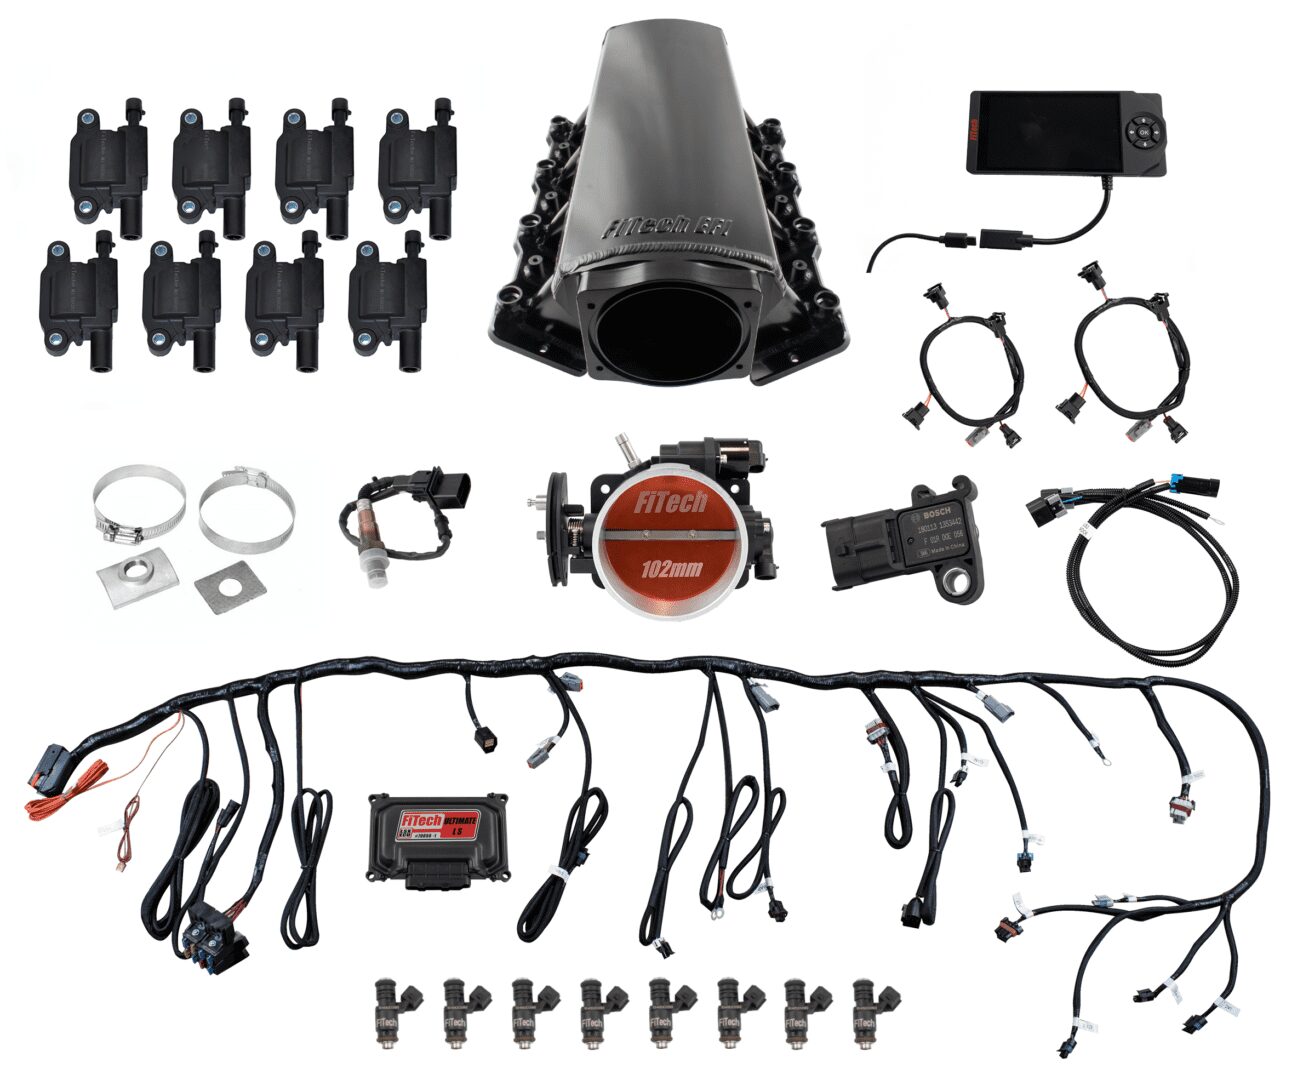 FiTech 78008 Ultimate LS Truck Kit (750 HP/No Trans Control/Tight-Fit In-Tank/Cathedral Port)